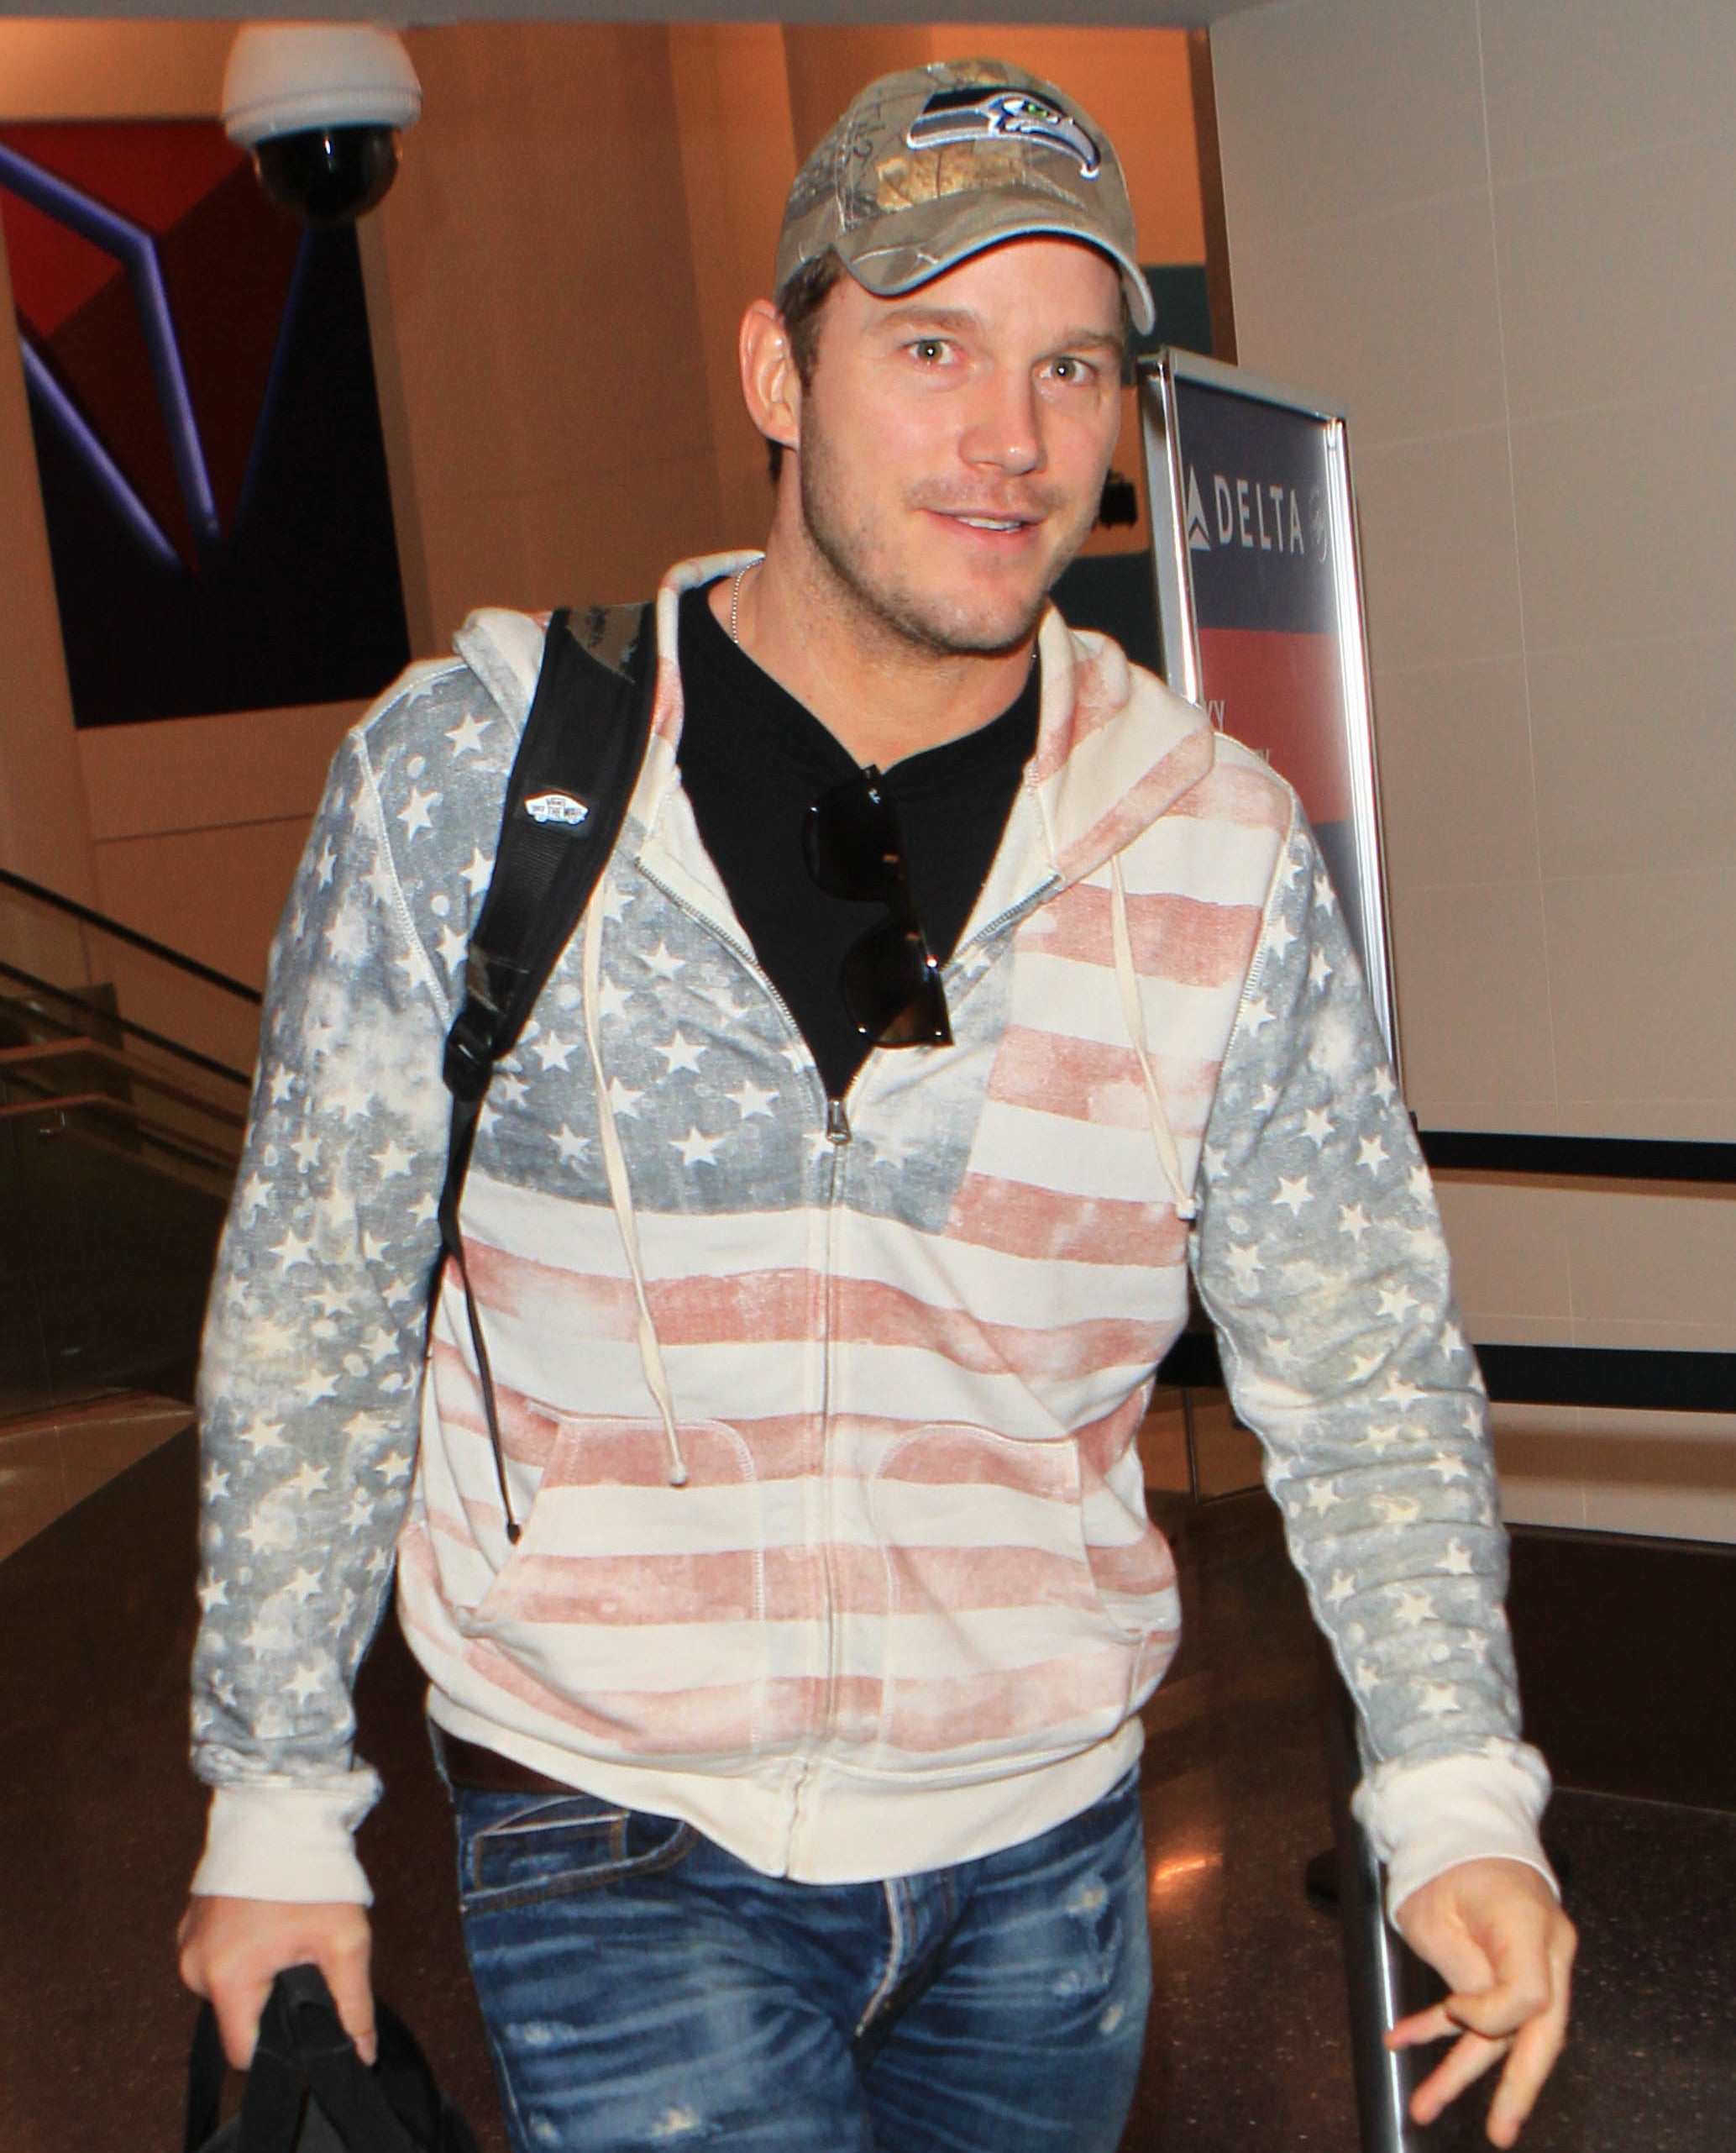 Chris in a cap, US flag hoodie, and jeans